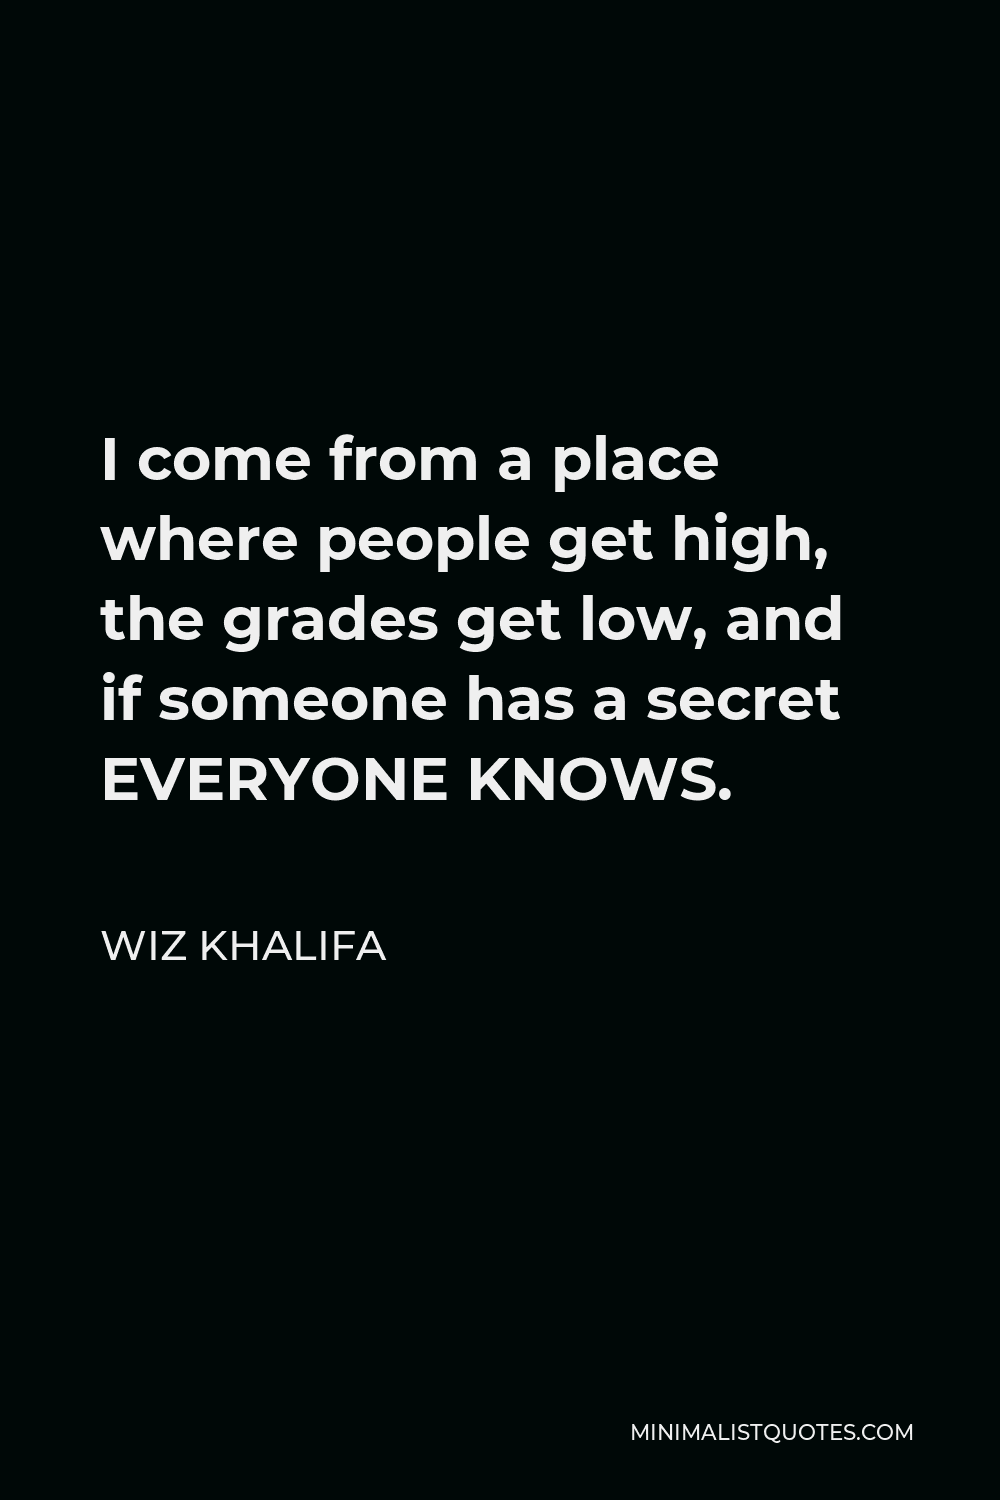 Wiz Khalifa Quote - I come from a place where people get high, the grades get low, and if someone has a secret EVERYONE KNOWS.